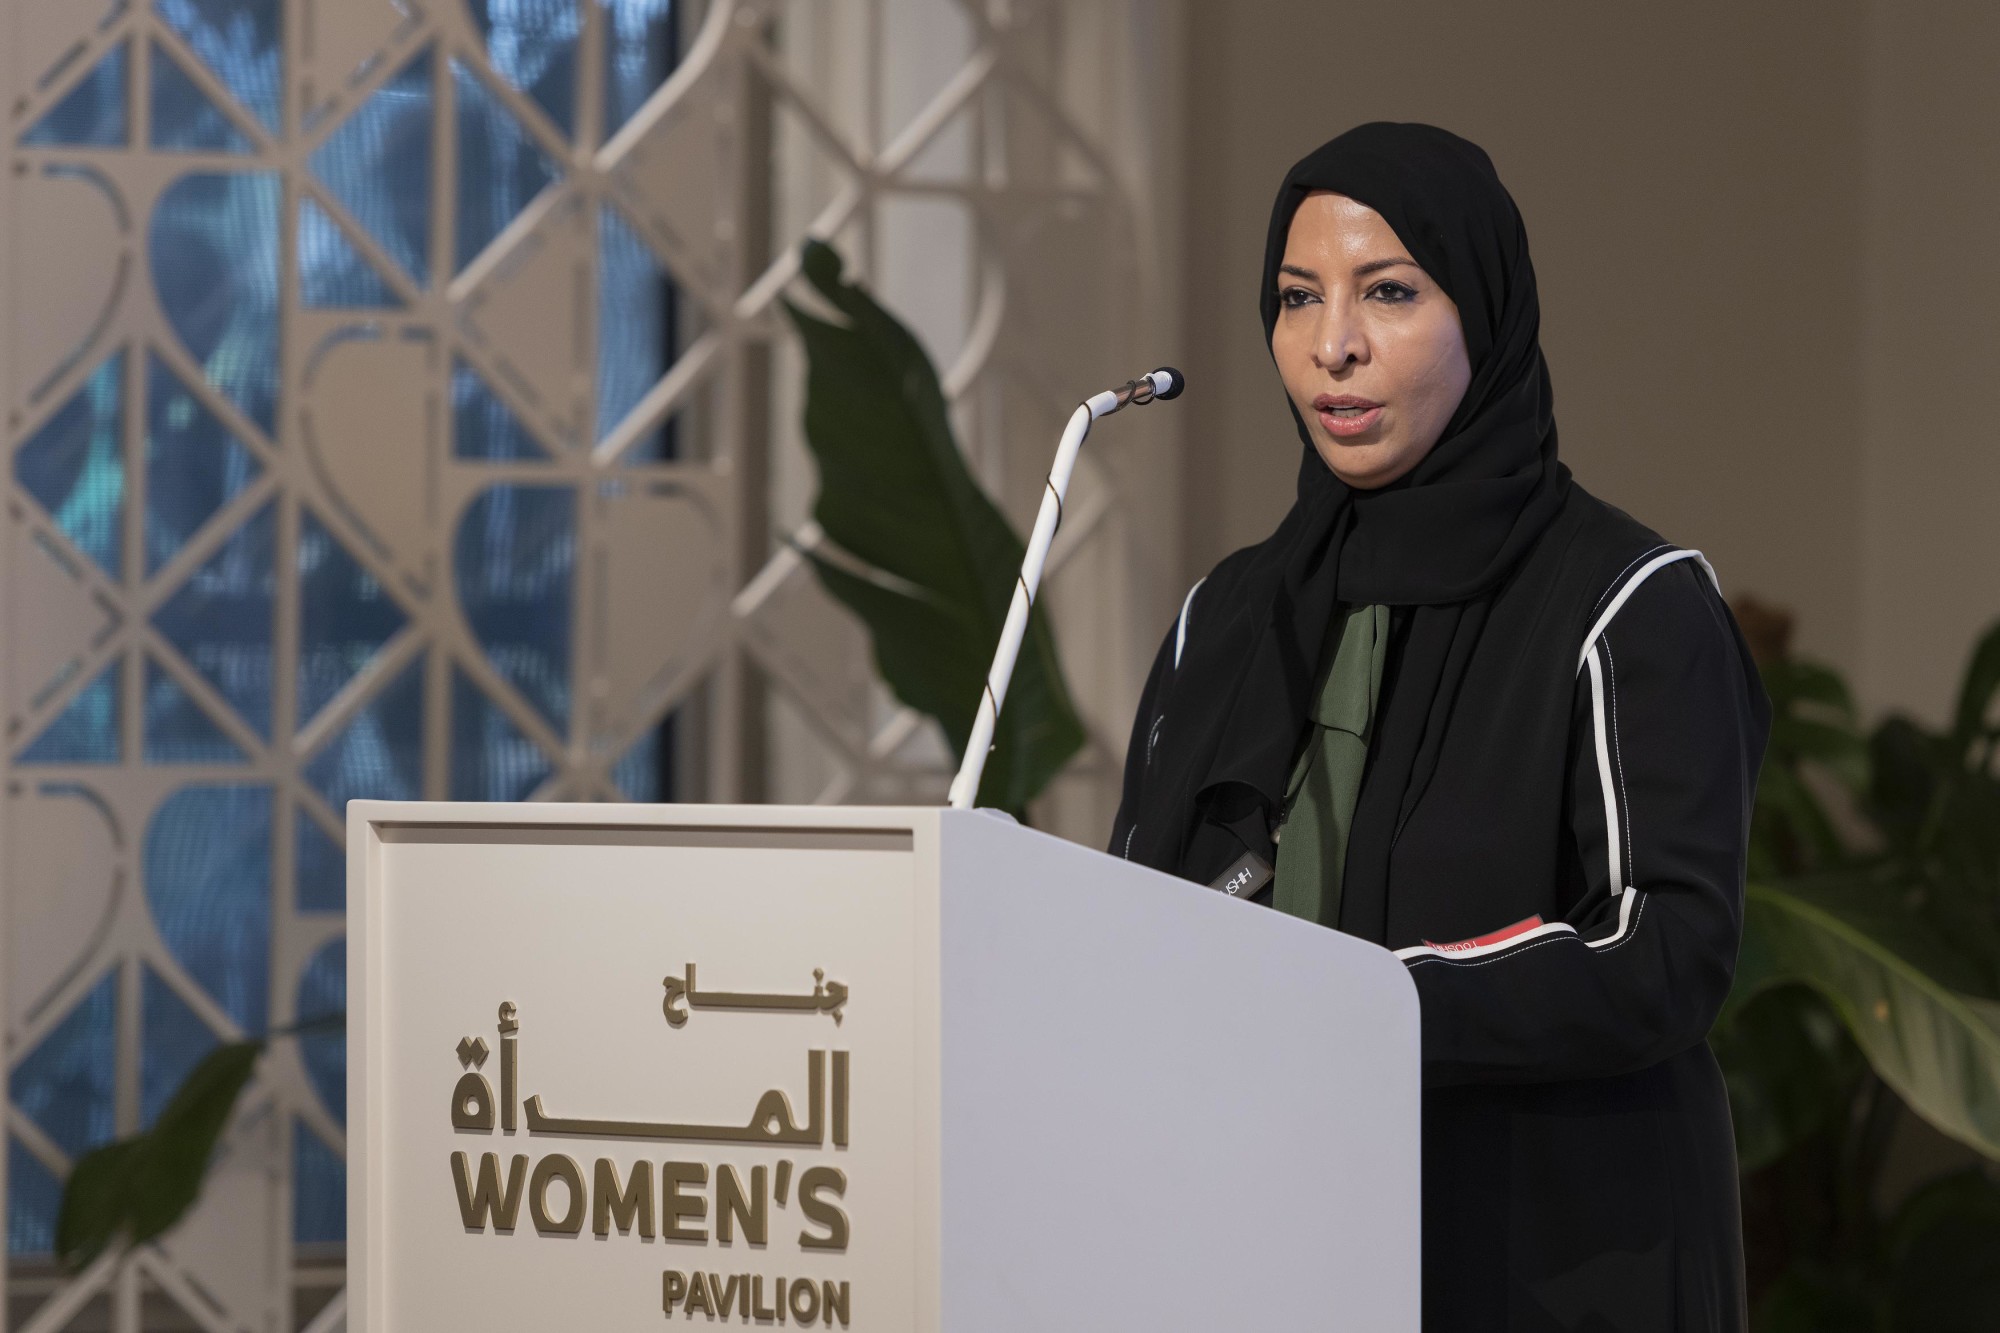 Her Excellency Sara Shuhail, General Director, EWAA Shelters for Women and Children and keynote speaker during the Outlier Series Ewaa - Women-s Pavilion Event m17801